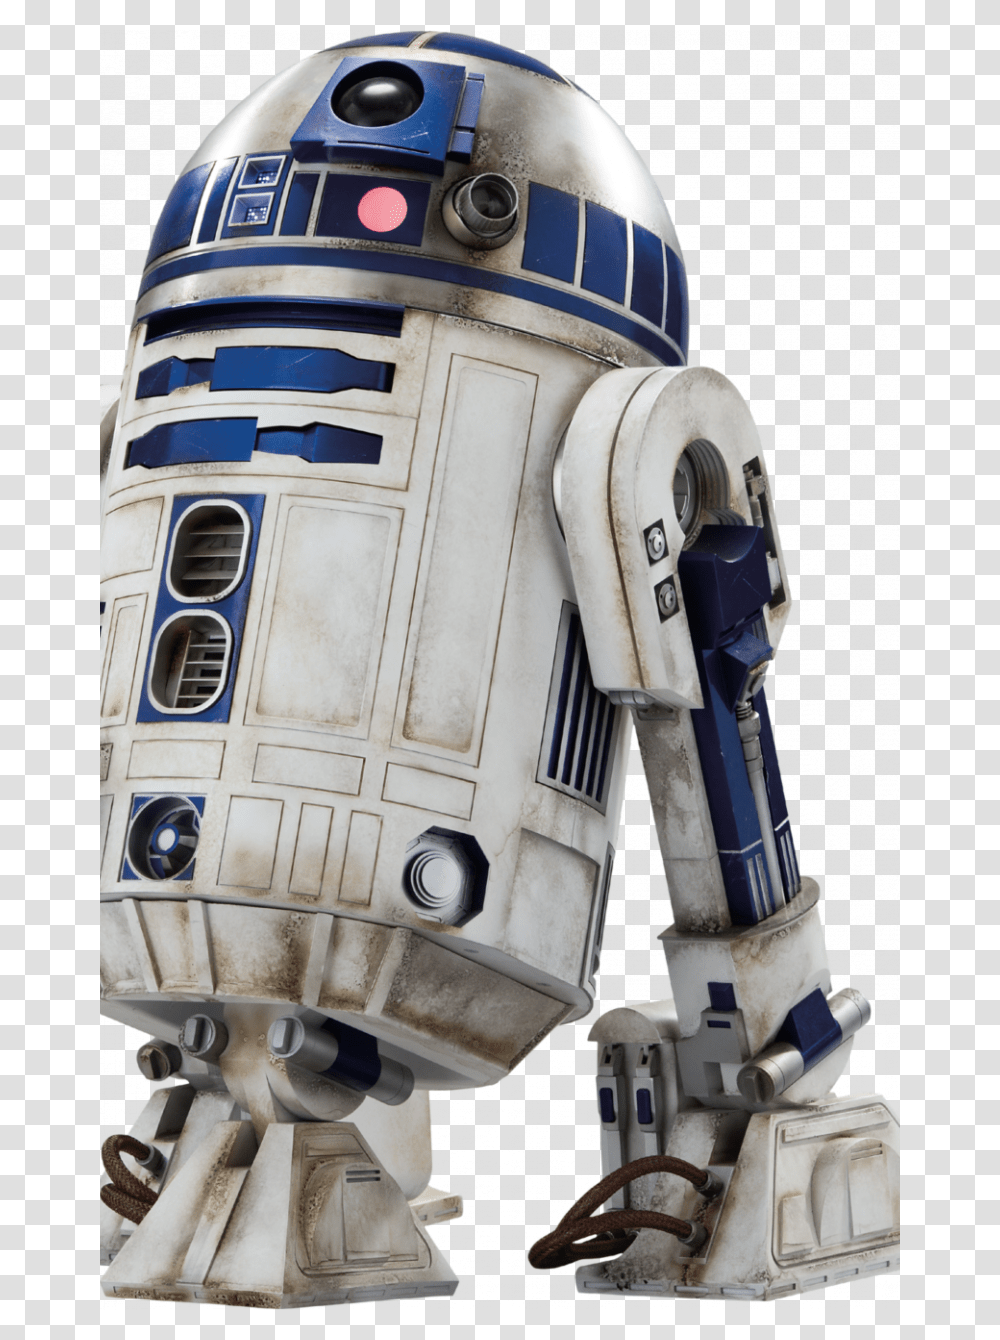 D2 Star Wars Ep7 The Force Awakens Characters Cut Star Wars Characters, Helmet, Apparel, Architecture Transparent Png